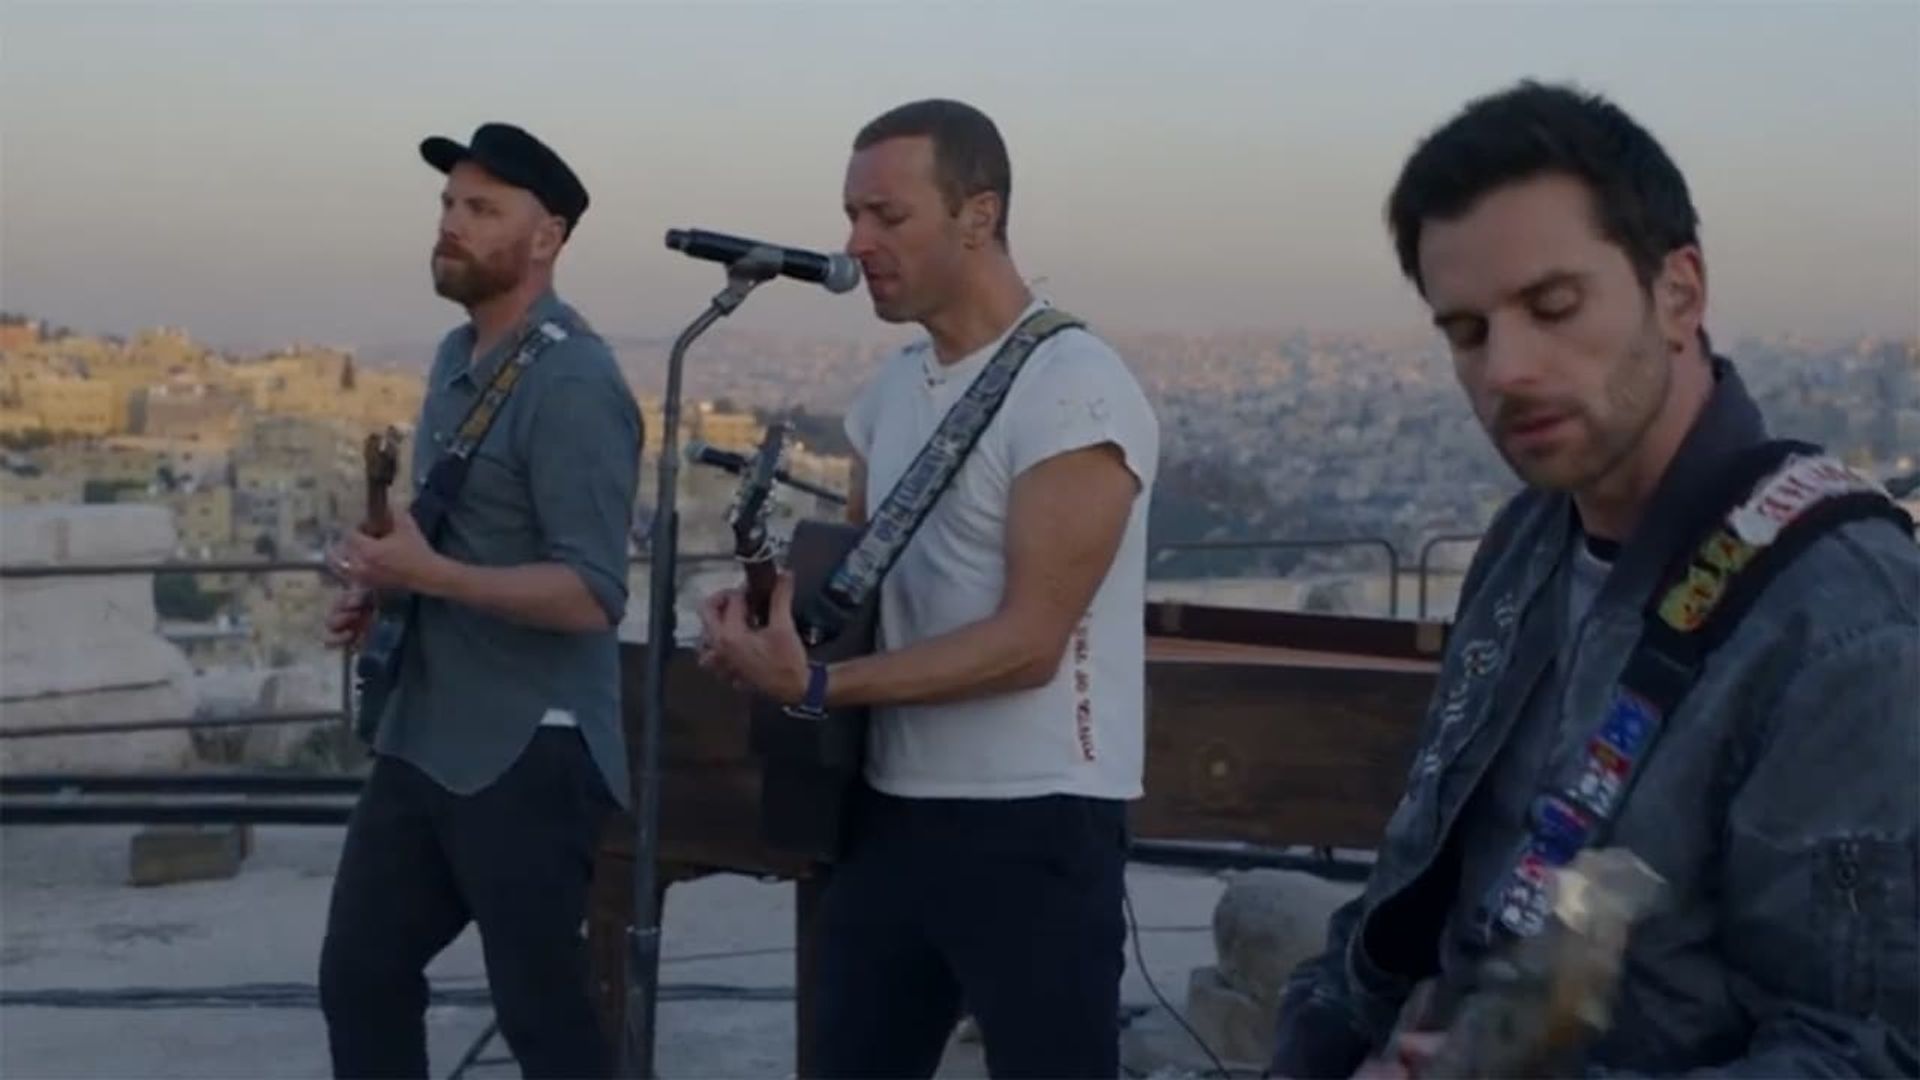 Coldplay: Everyday Life - Live in Jordan background